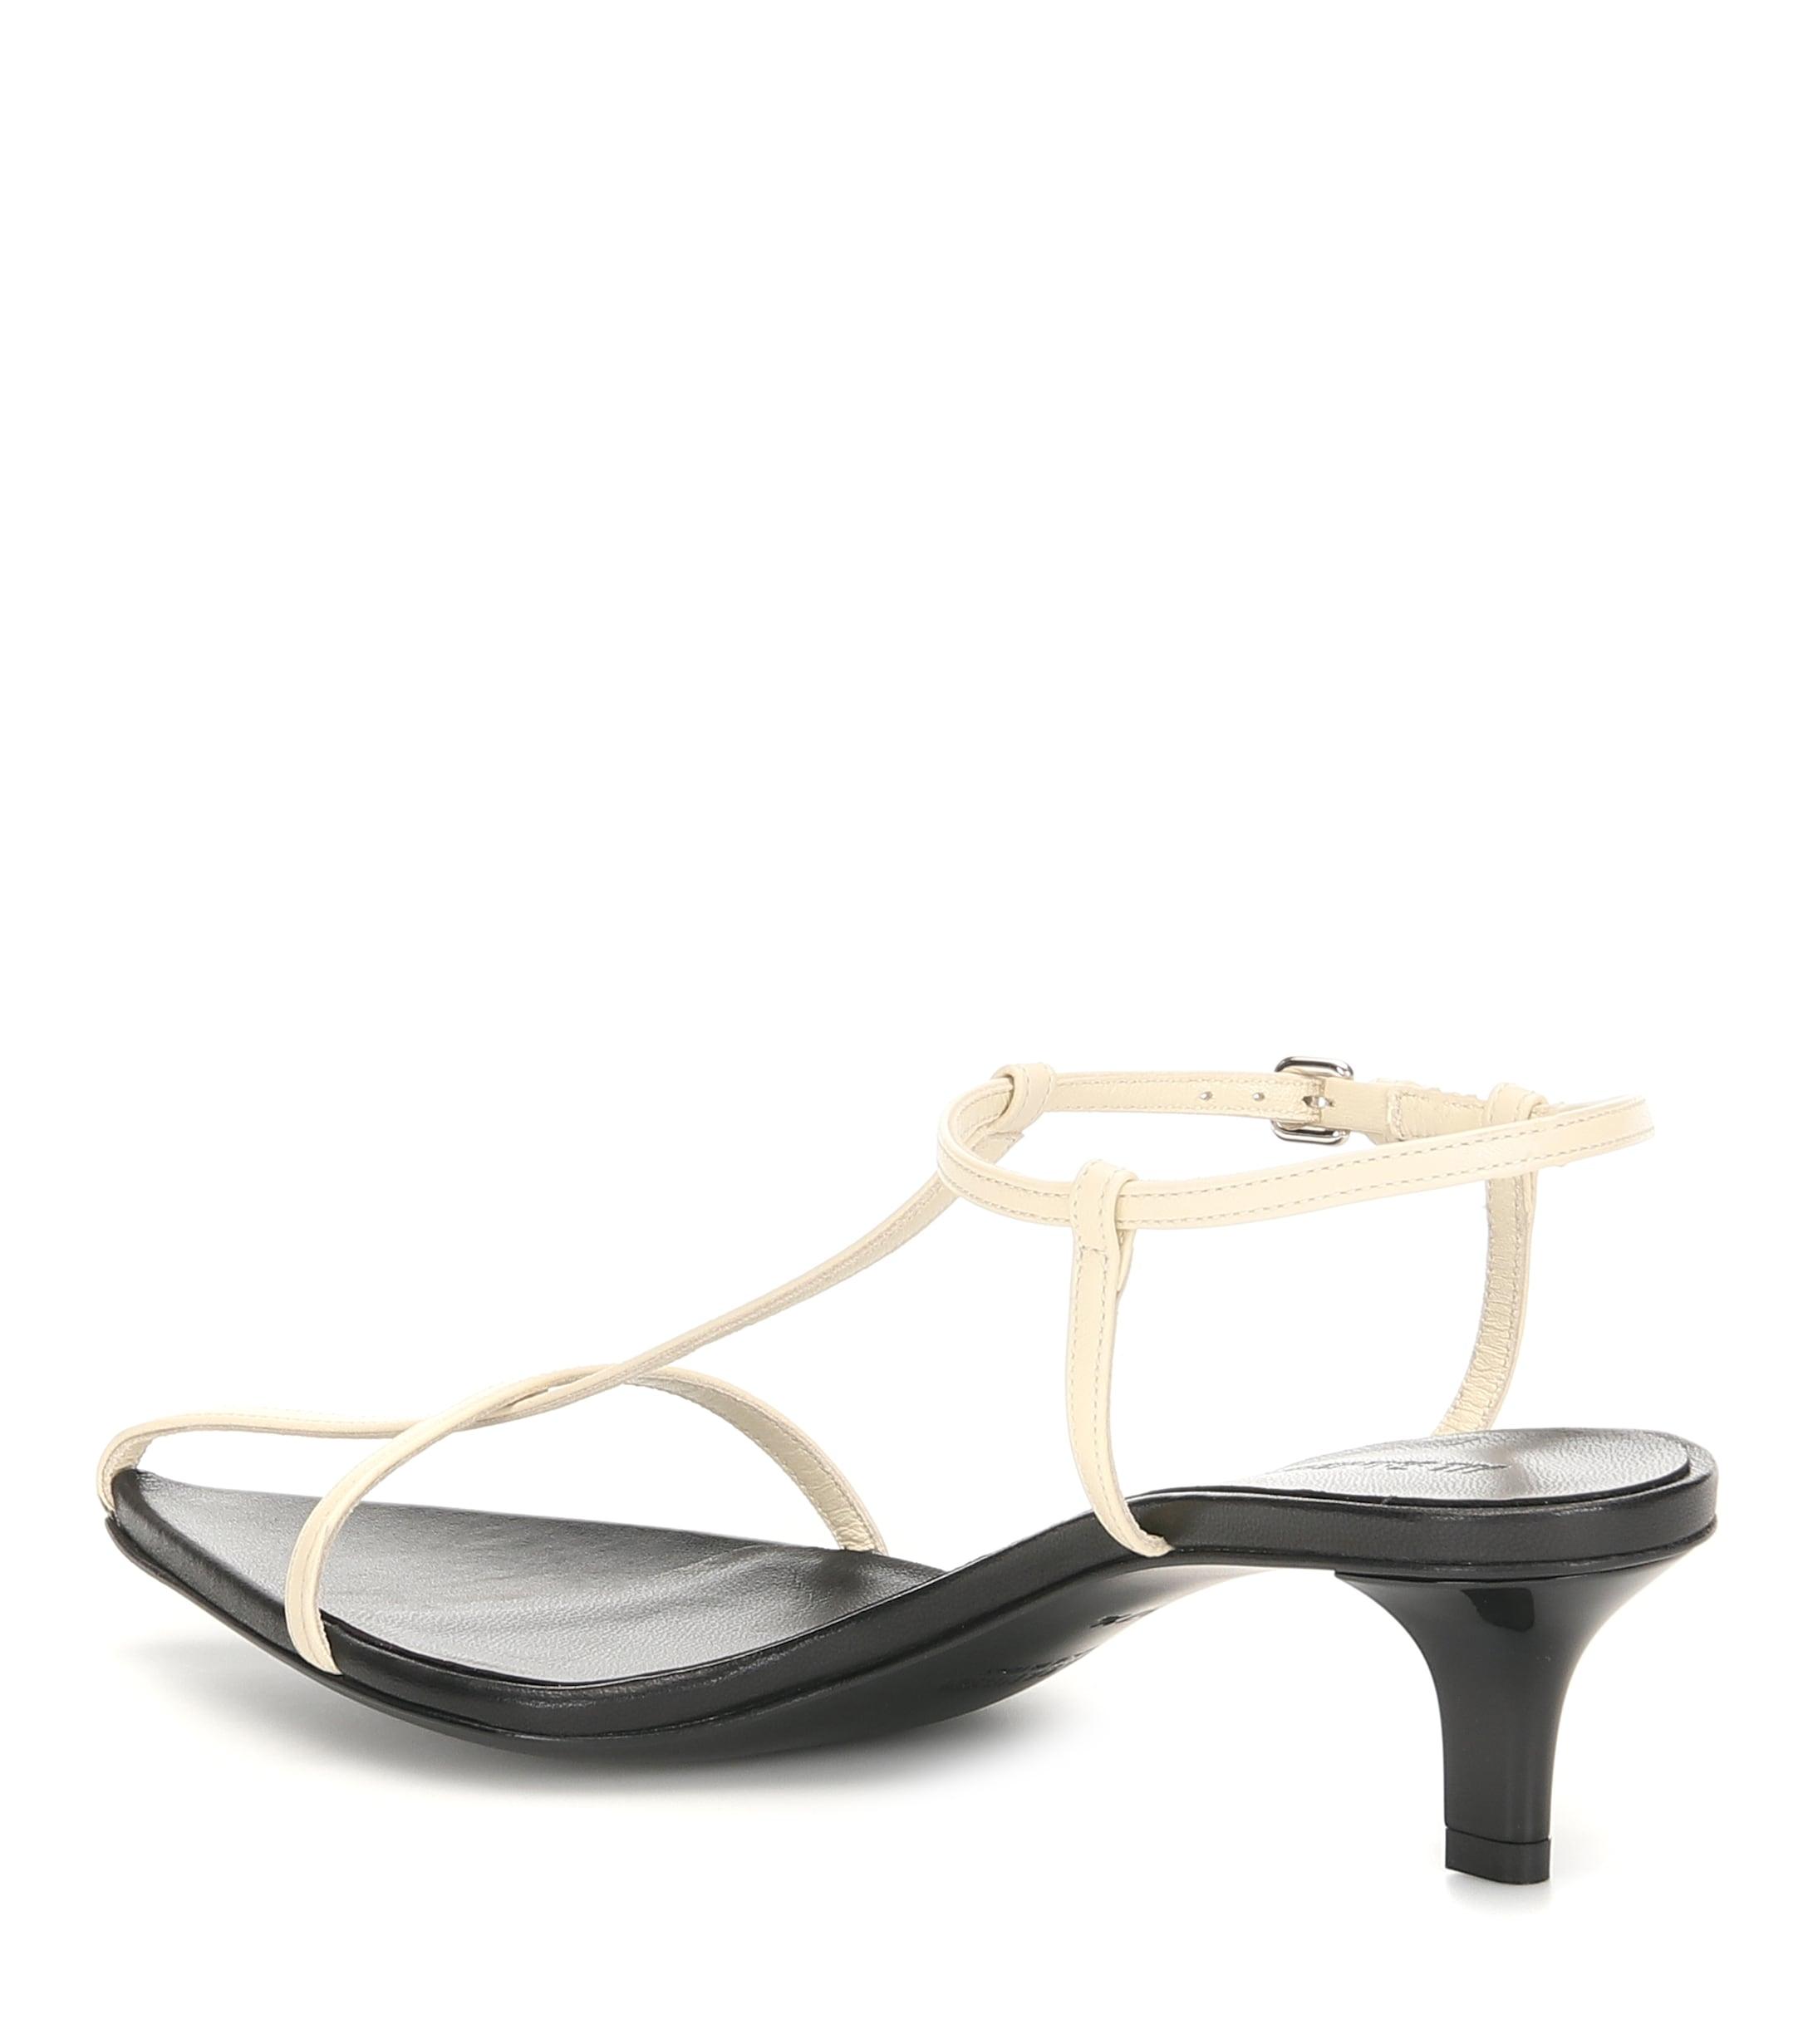 Jil Sander Leather Sandals in White - Lyst